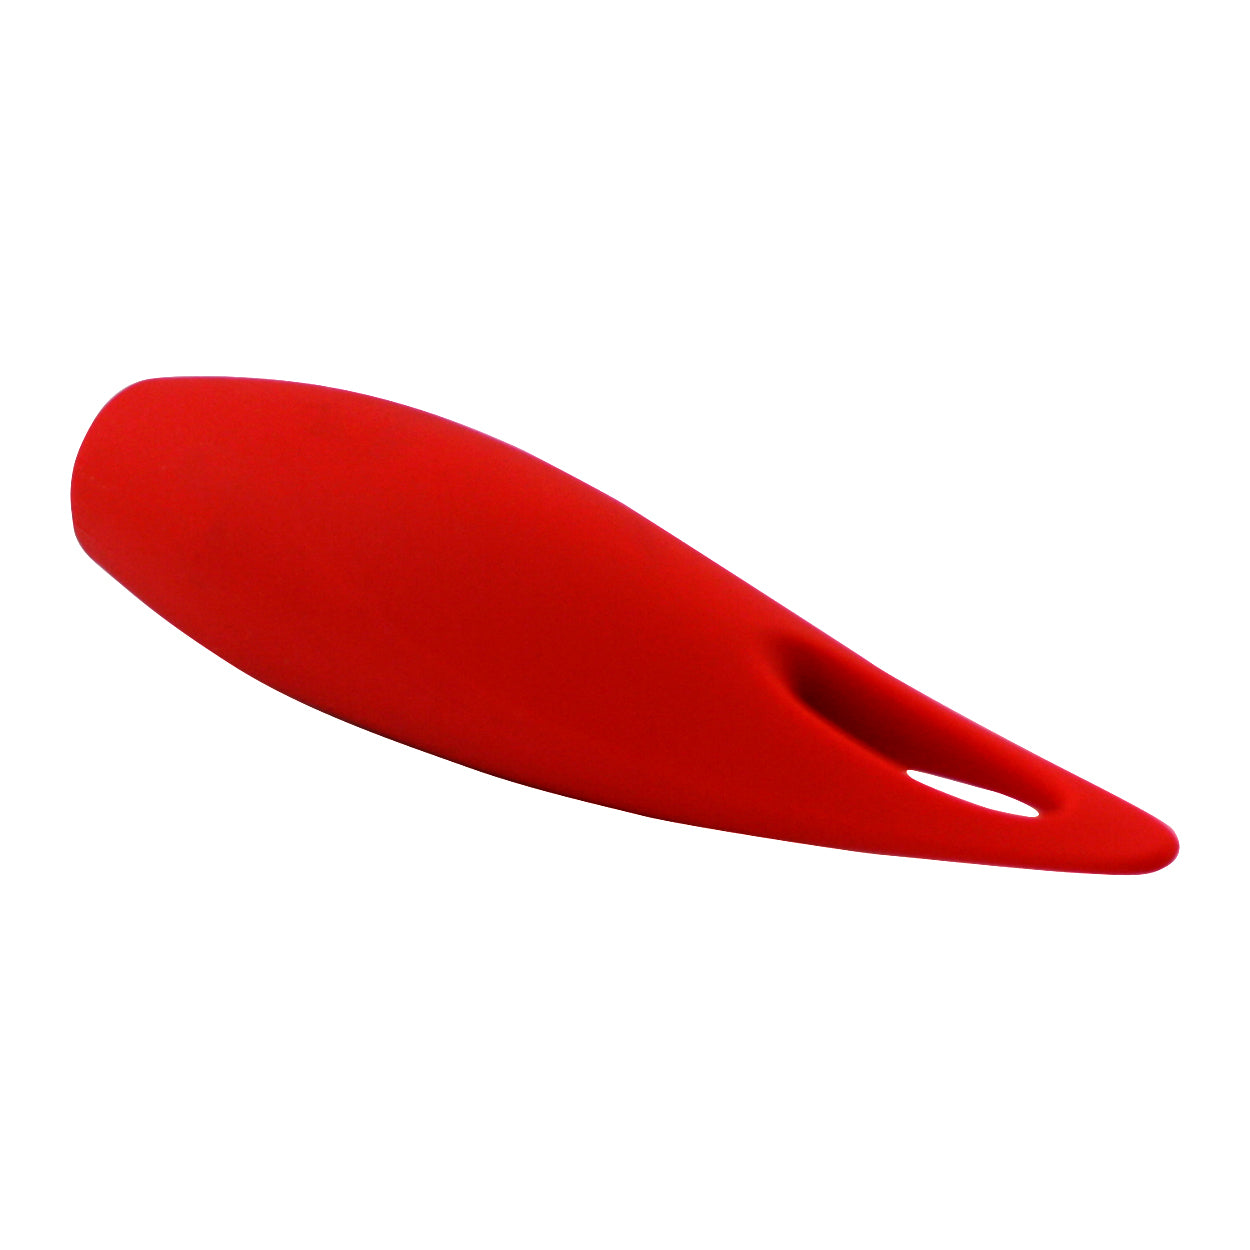 Image of Little Spark Clitoral Vibrator - Surrounds Your Clit in Vibration